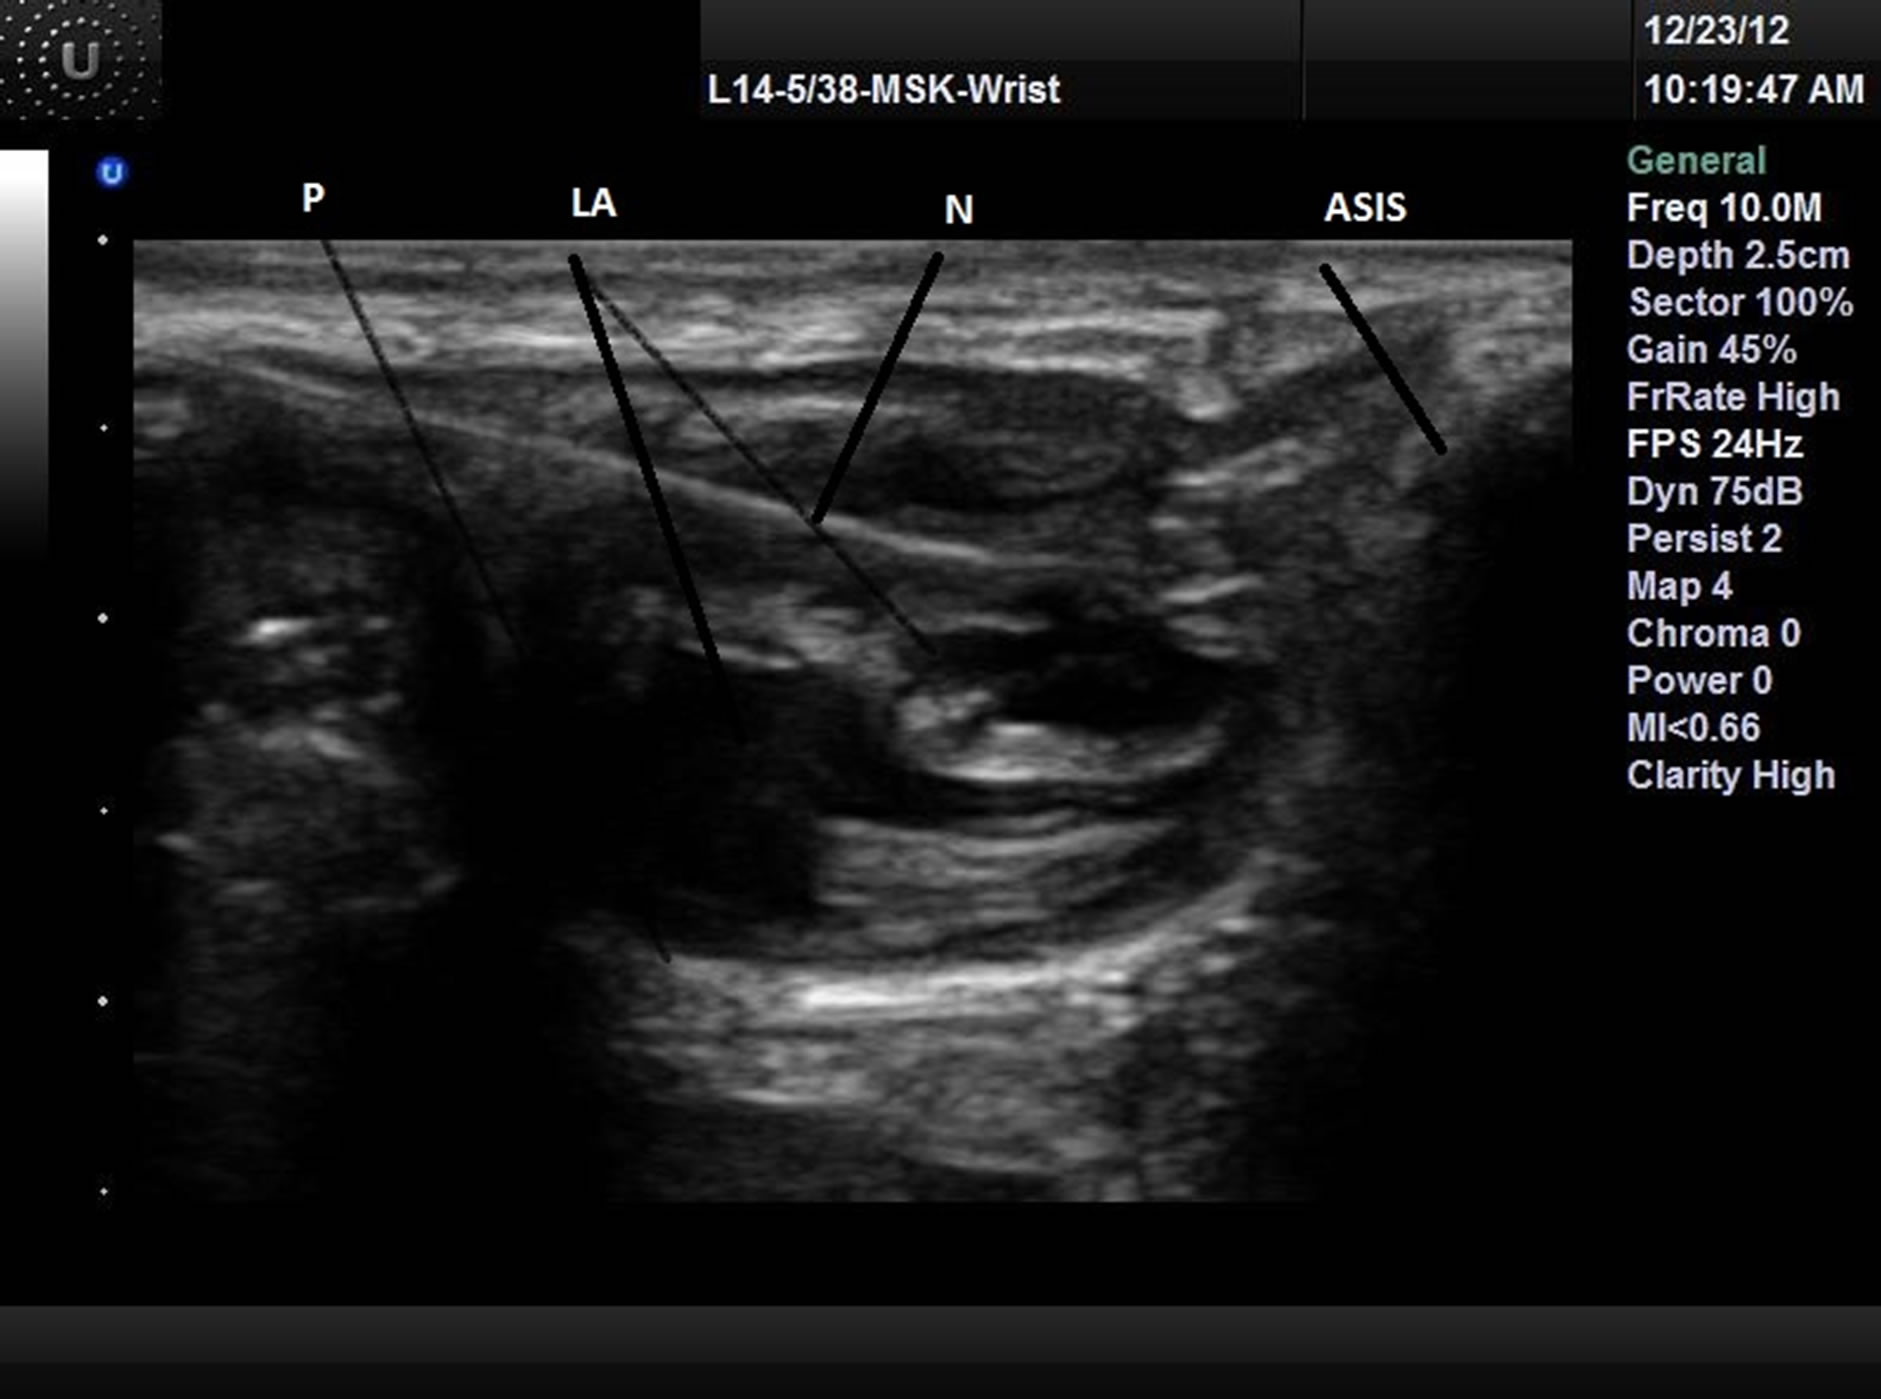 New Approach of Ultrasound-Guided Genitofemoral Nerve Block in Addition